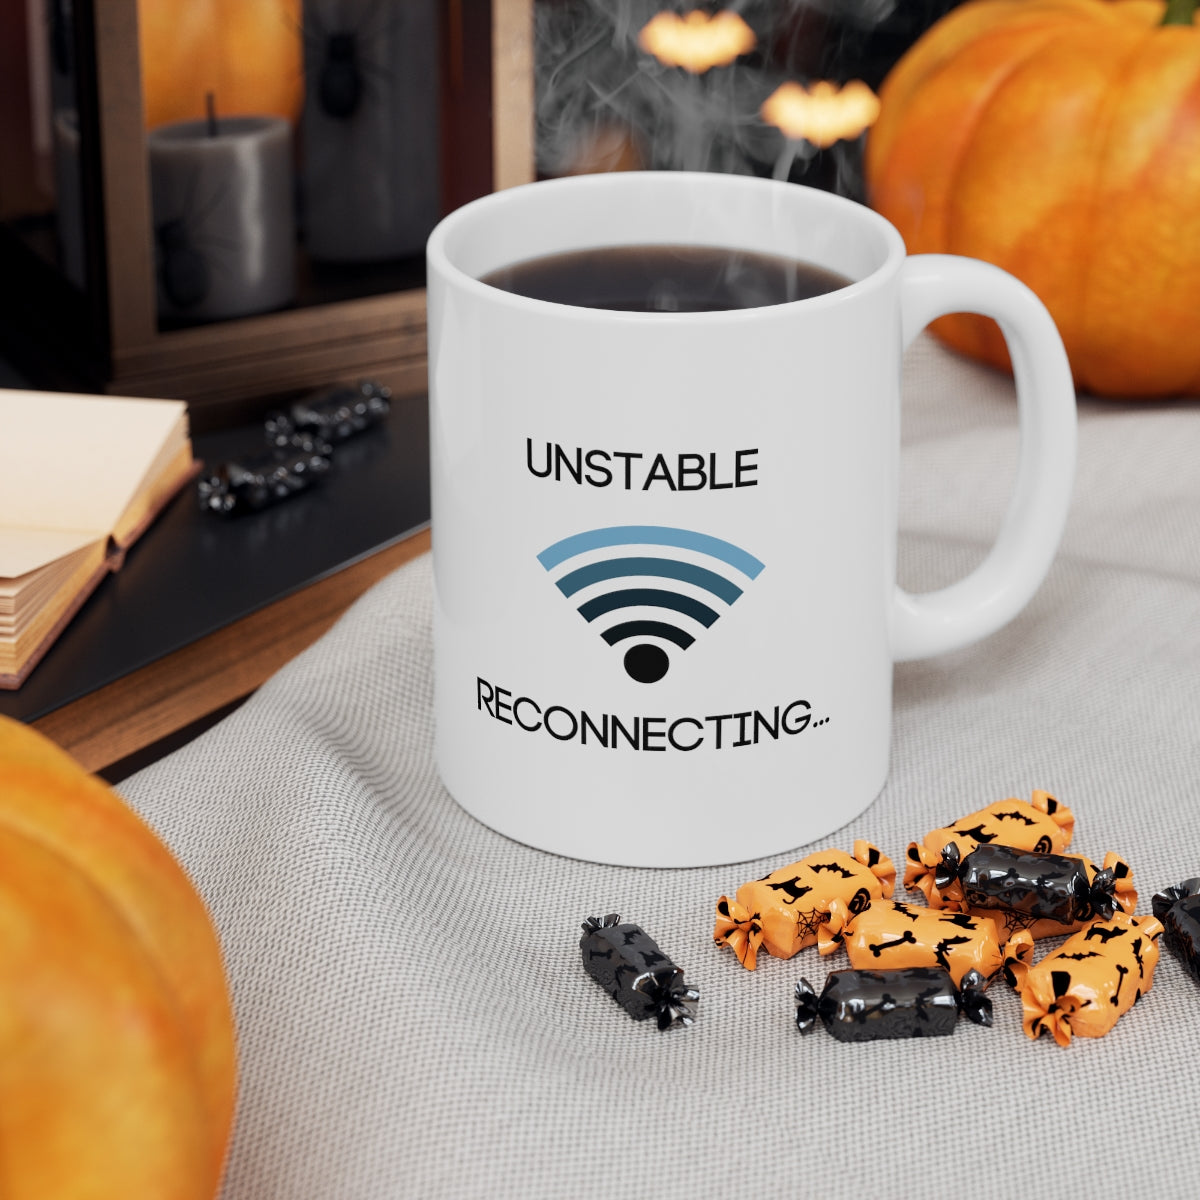 "Unstable Reconnecting" Mug